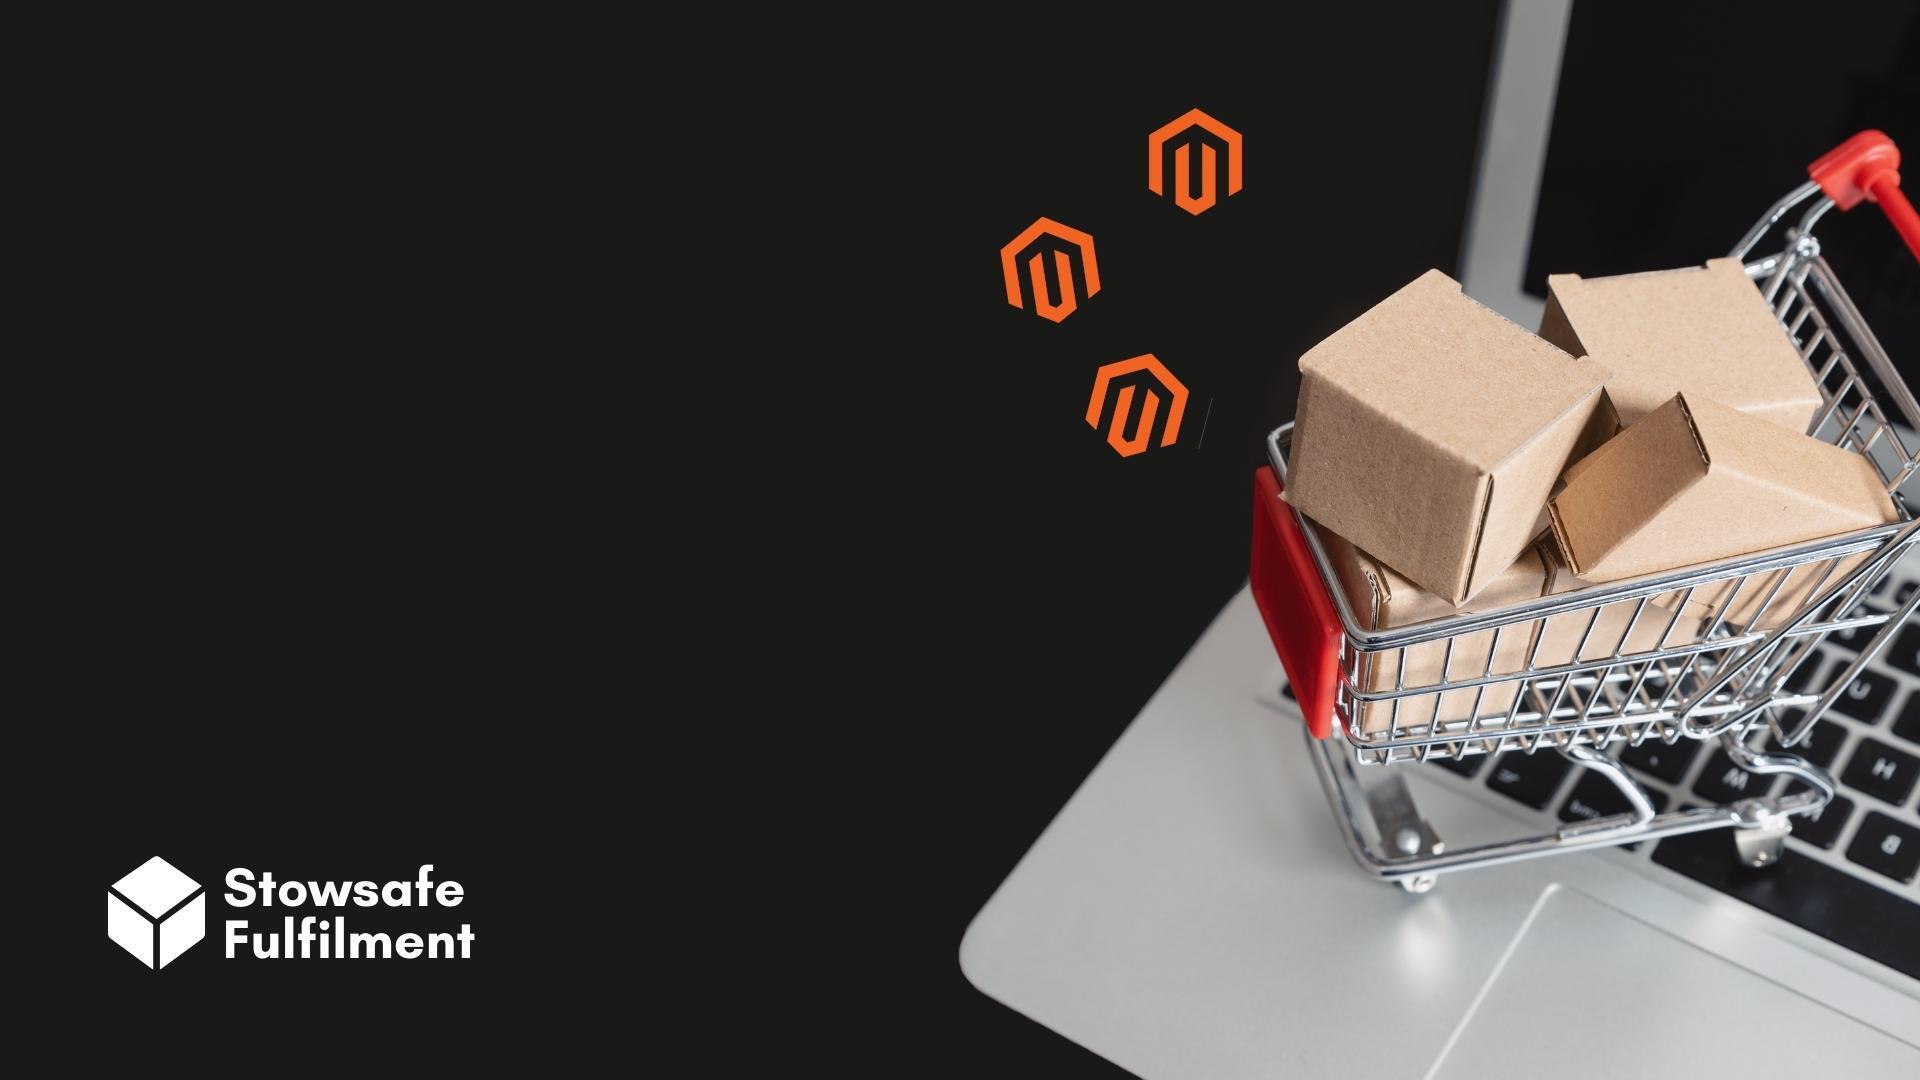 Magento is a powerful eCommerce platform – but it won't give you an optimum webstore by default. Read on to find out performance-improving steps.